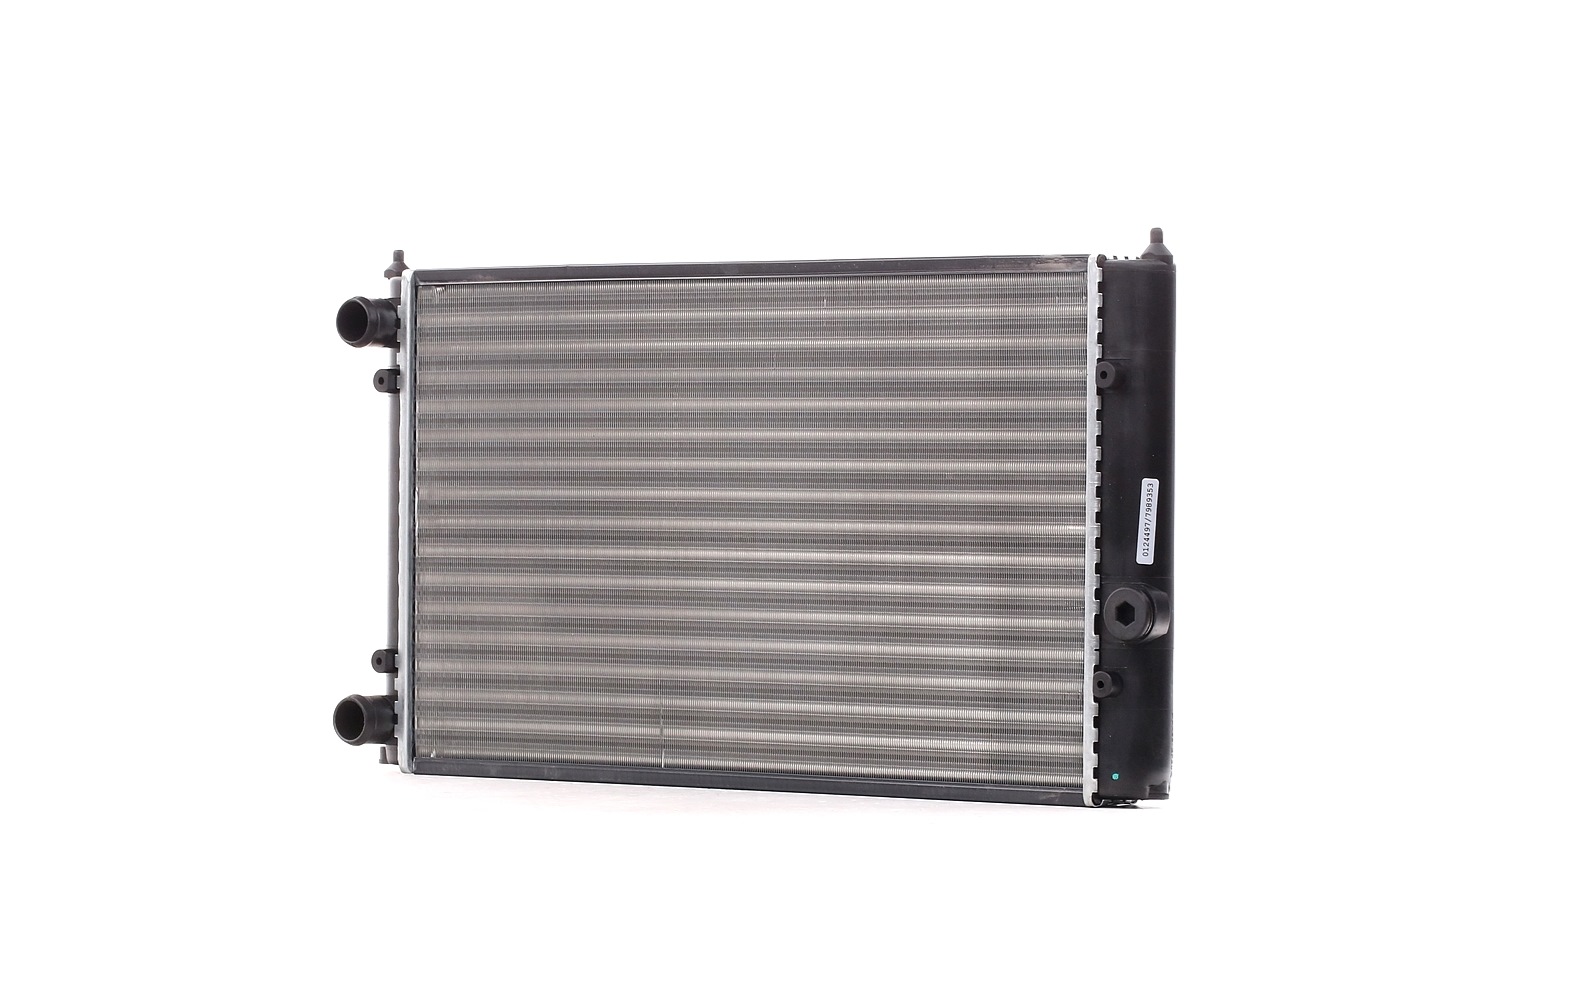 STARK SKRD-0120256 Engine radiator Aluminium, Plastic, for vehicles without air conditioning, Manual Transmission